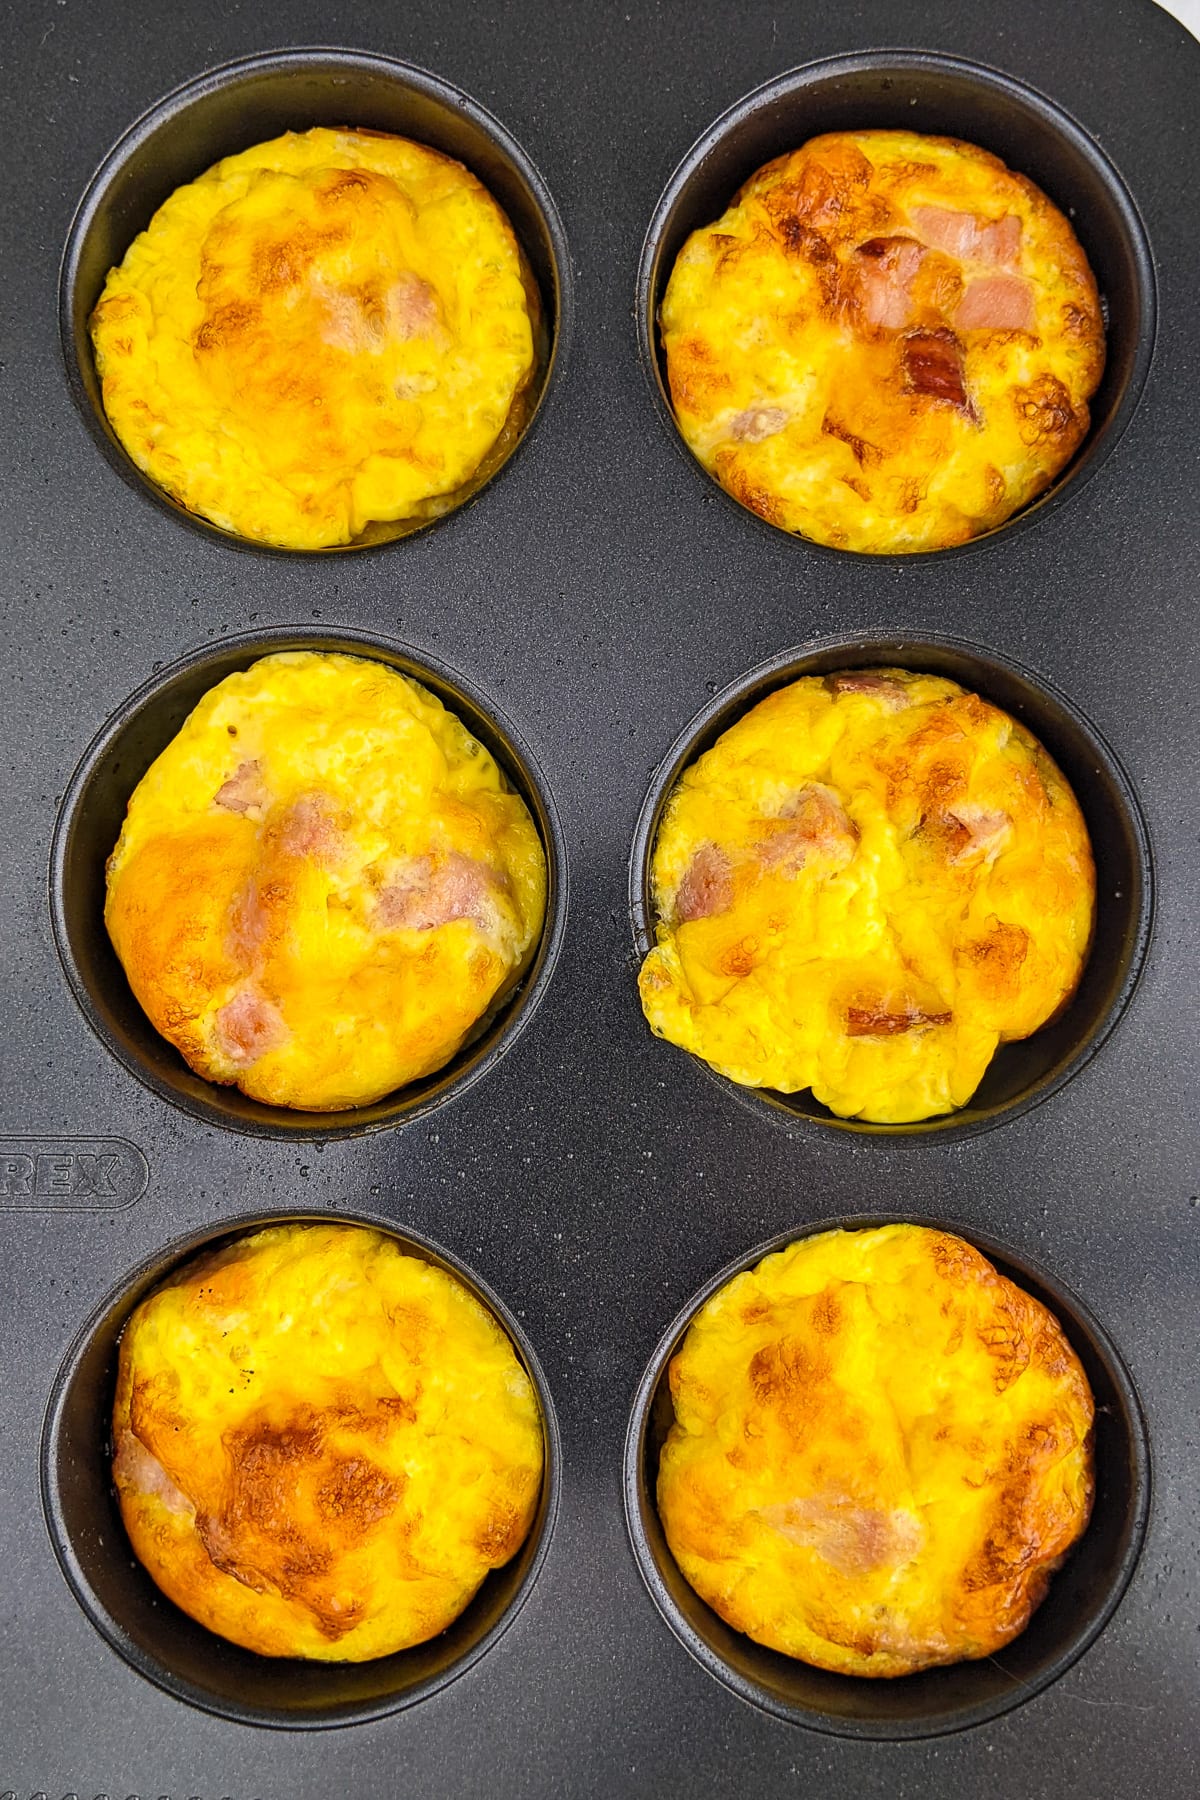 Top view of a metal muffins mold with 6 cheese muffins.